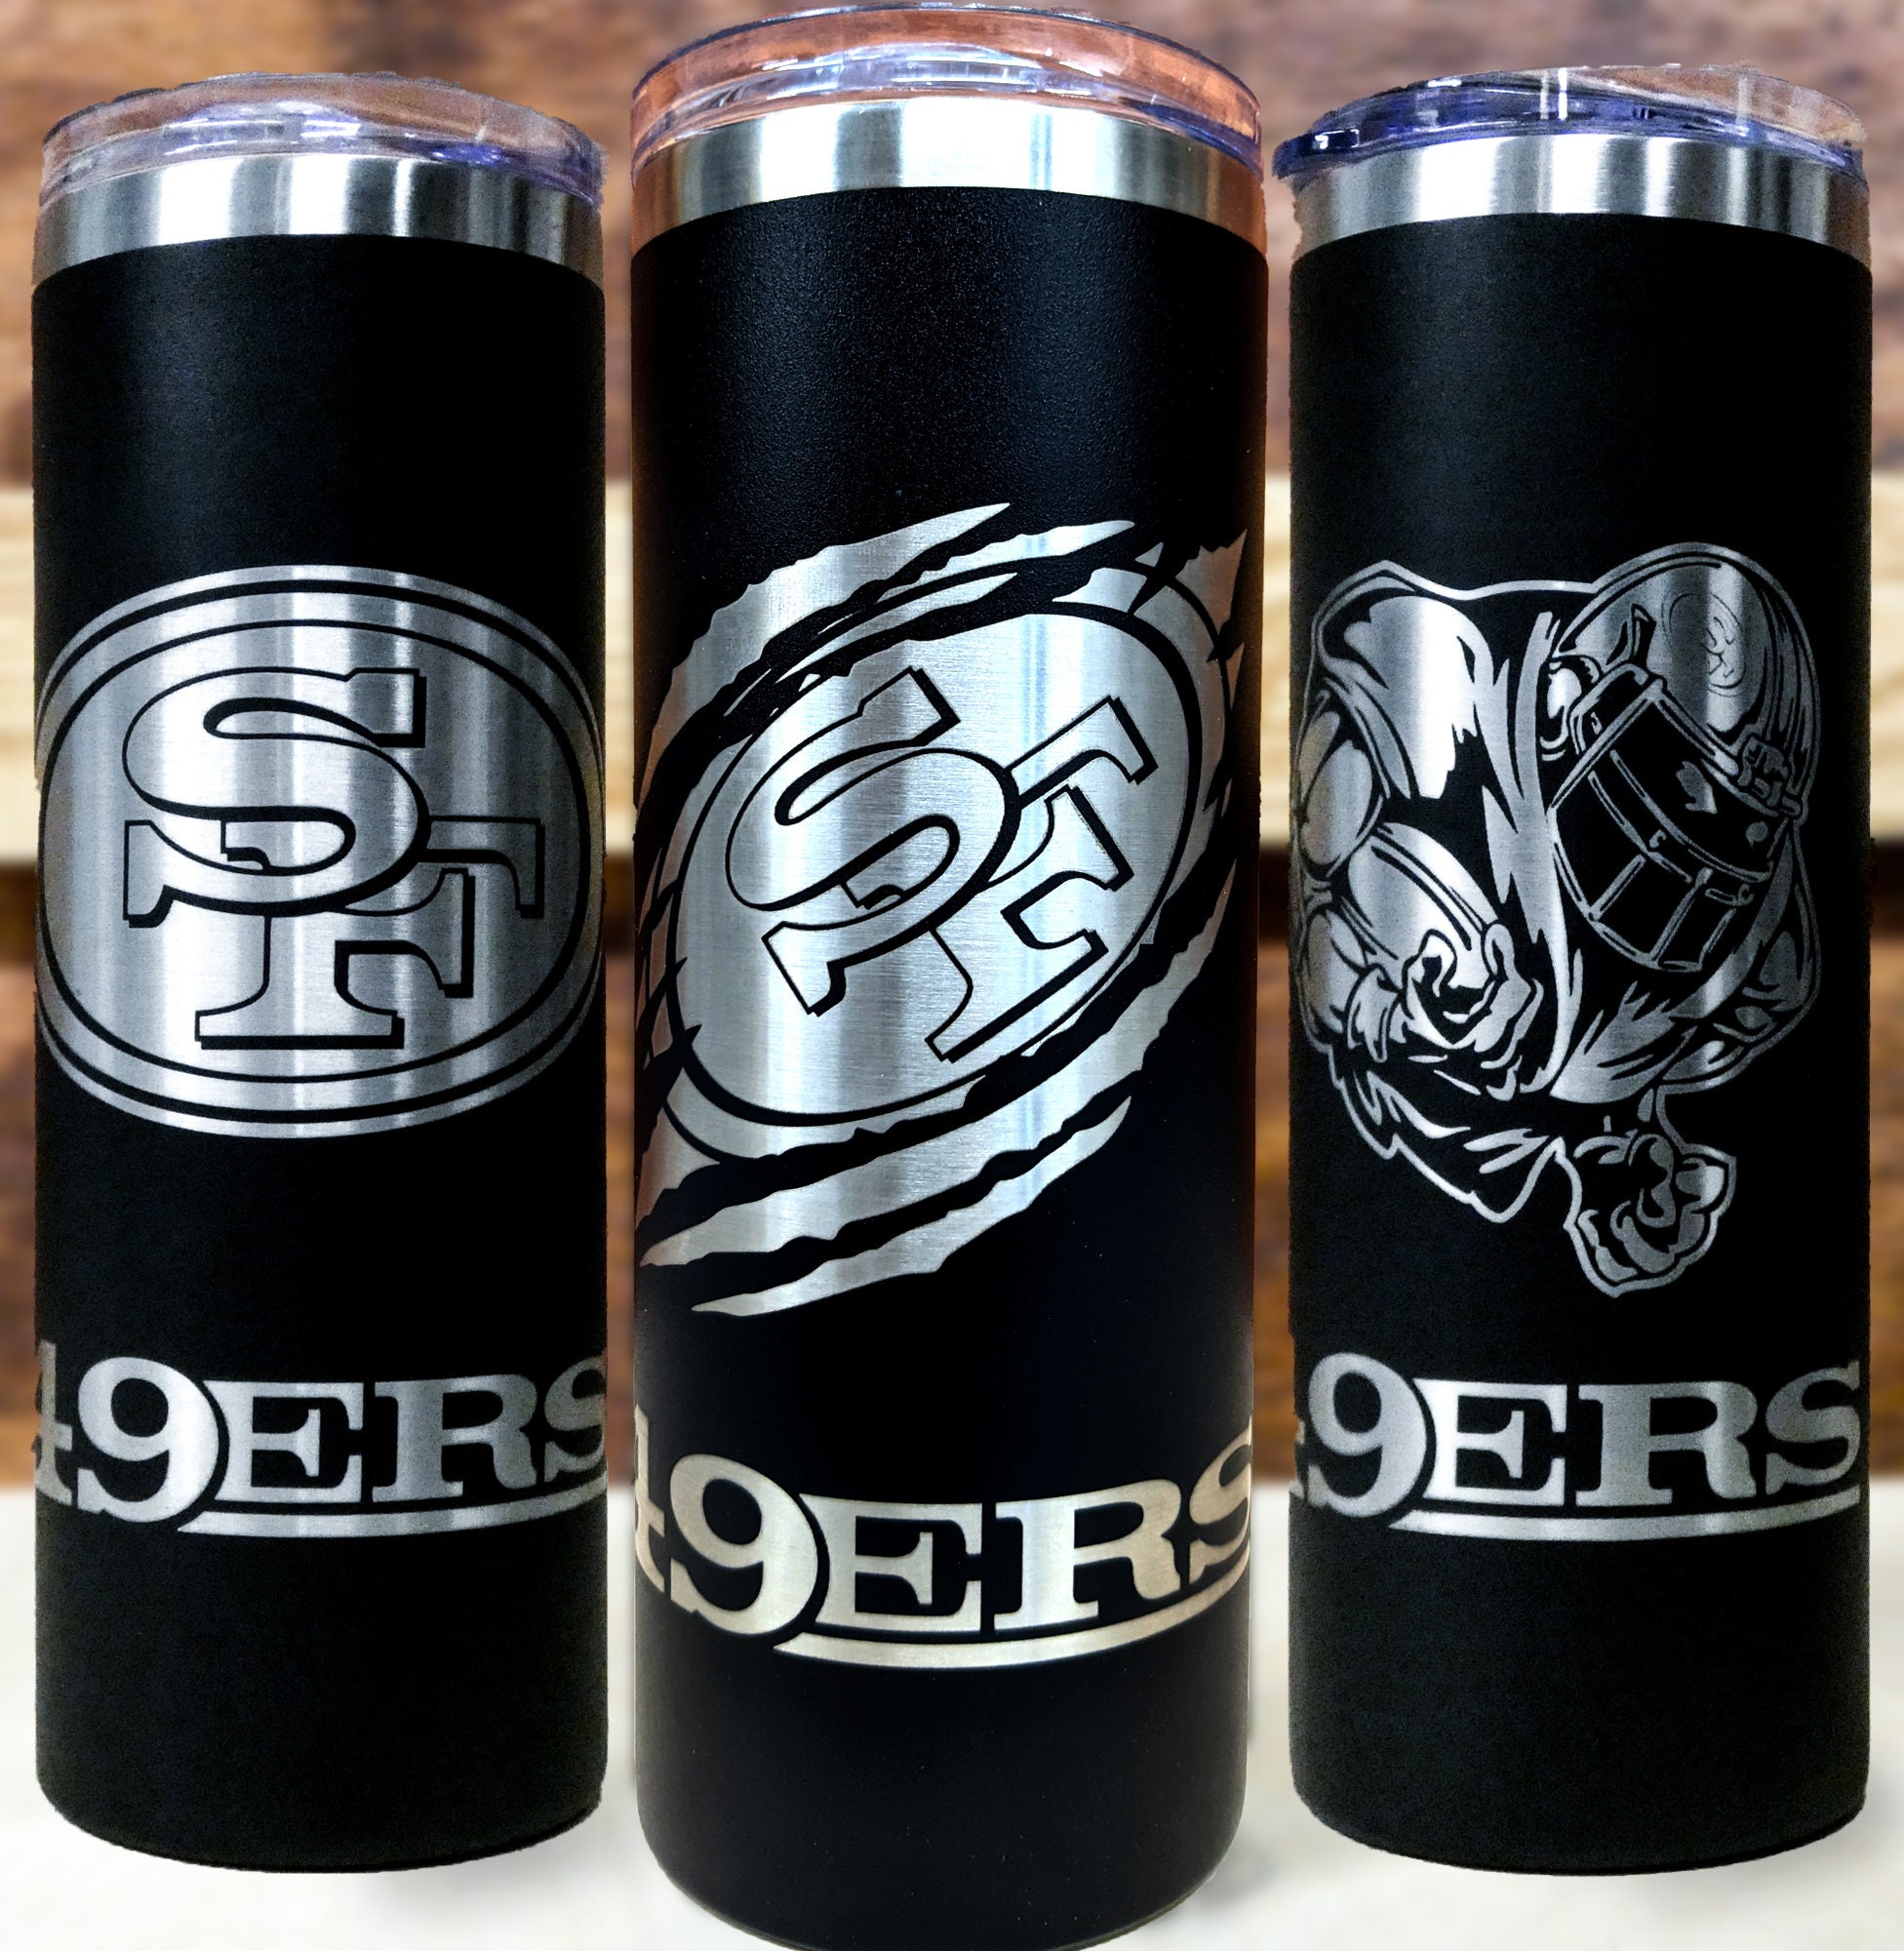 San Francisco 49ers Stainless Steel Tumbler · Krave Designs Custom Gifts ·  Online Store Powered by Storenvy